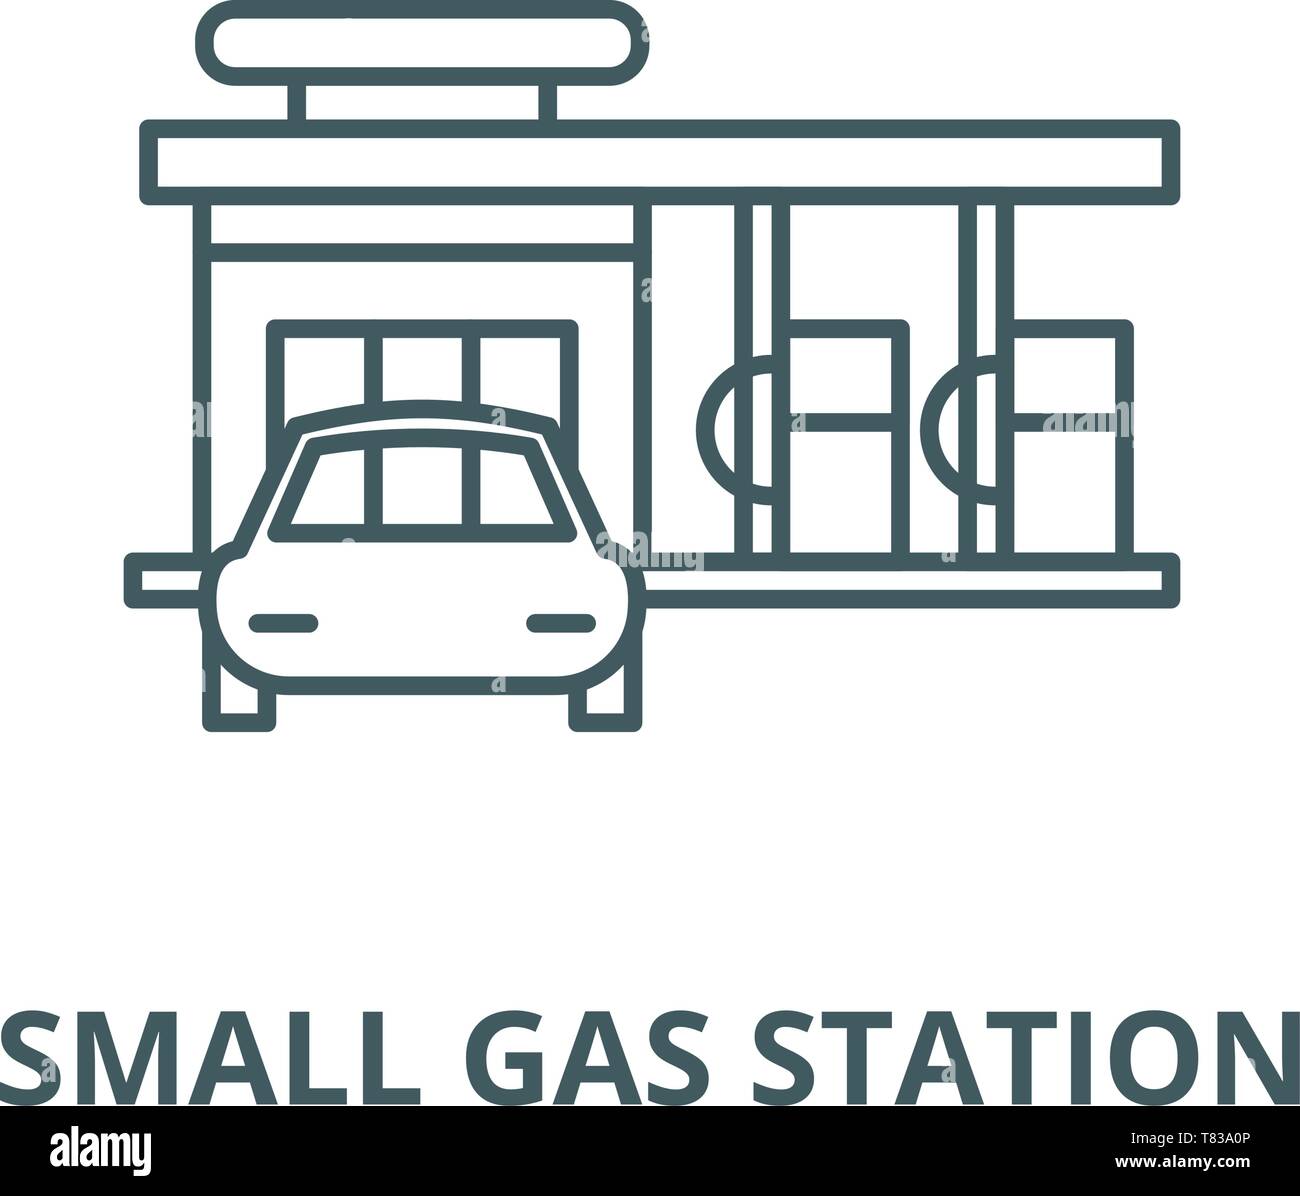 Gas Station Grey Sketch Vector Icon. Petrol Station Symbol Royalty Free  SVG, Cliparts, Vectors, And Stock Illustration. Image 190277772.